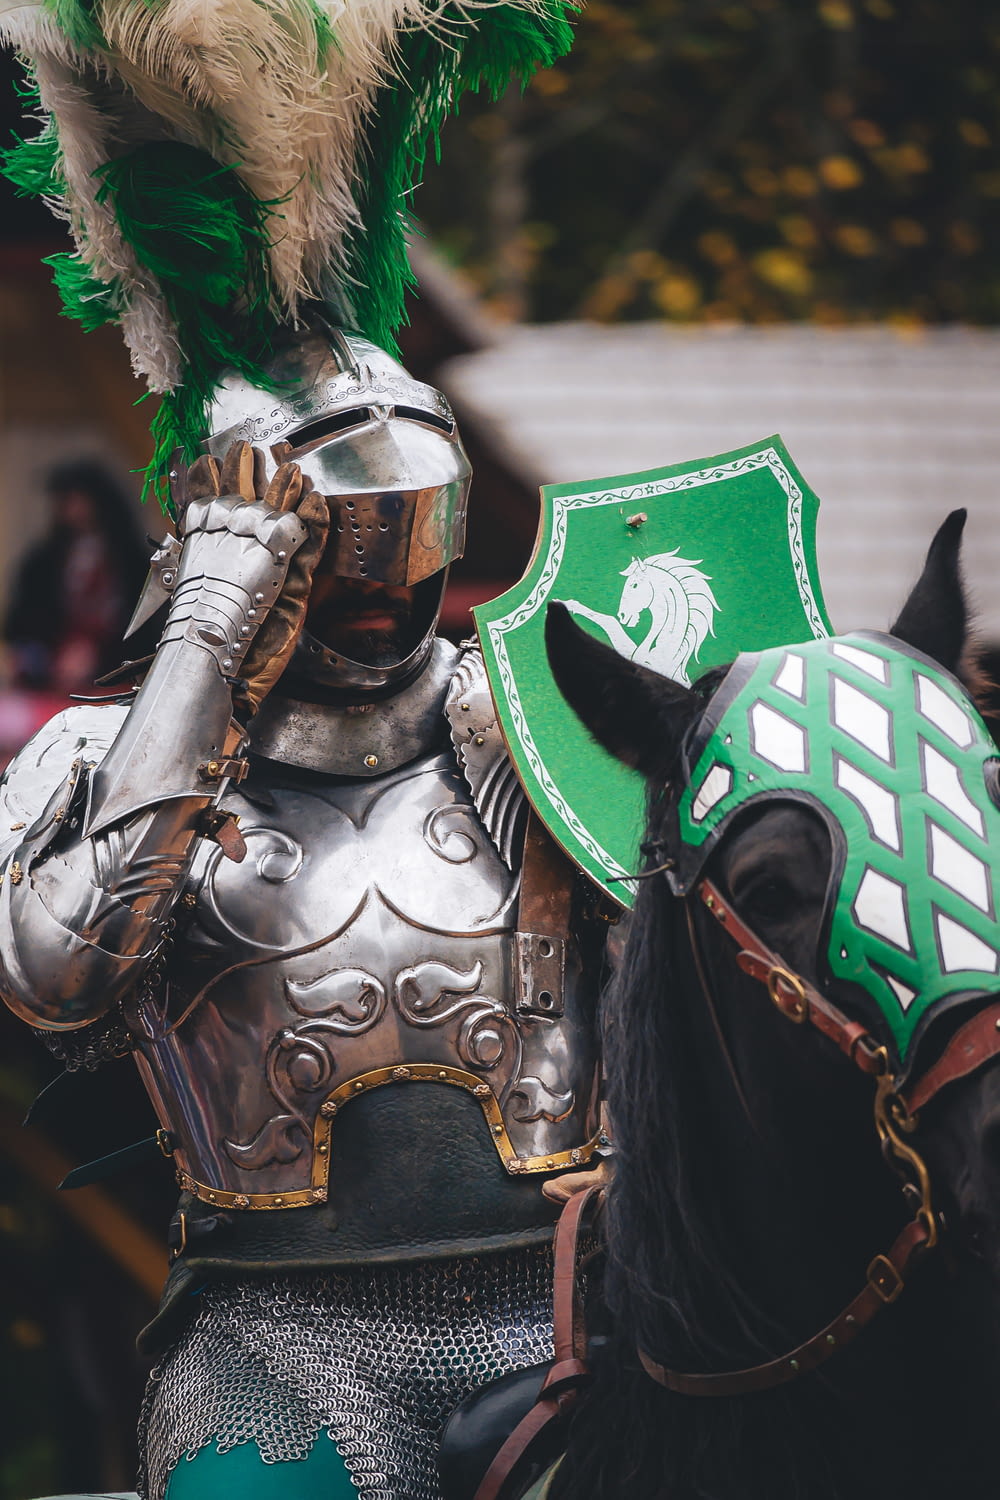 a man in a green and white costume on a horse